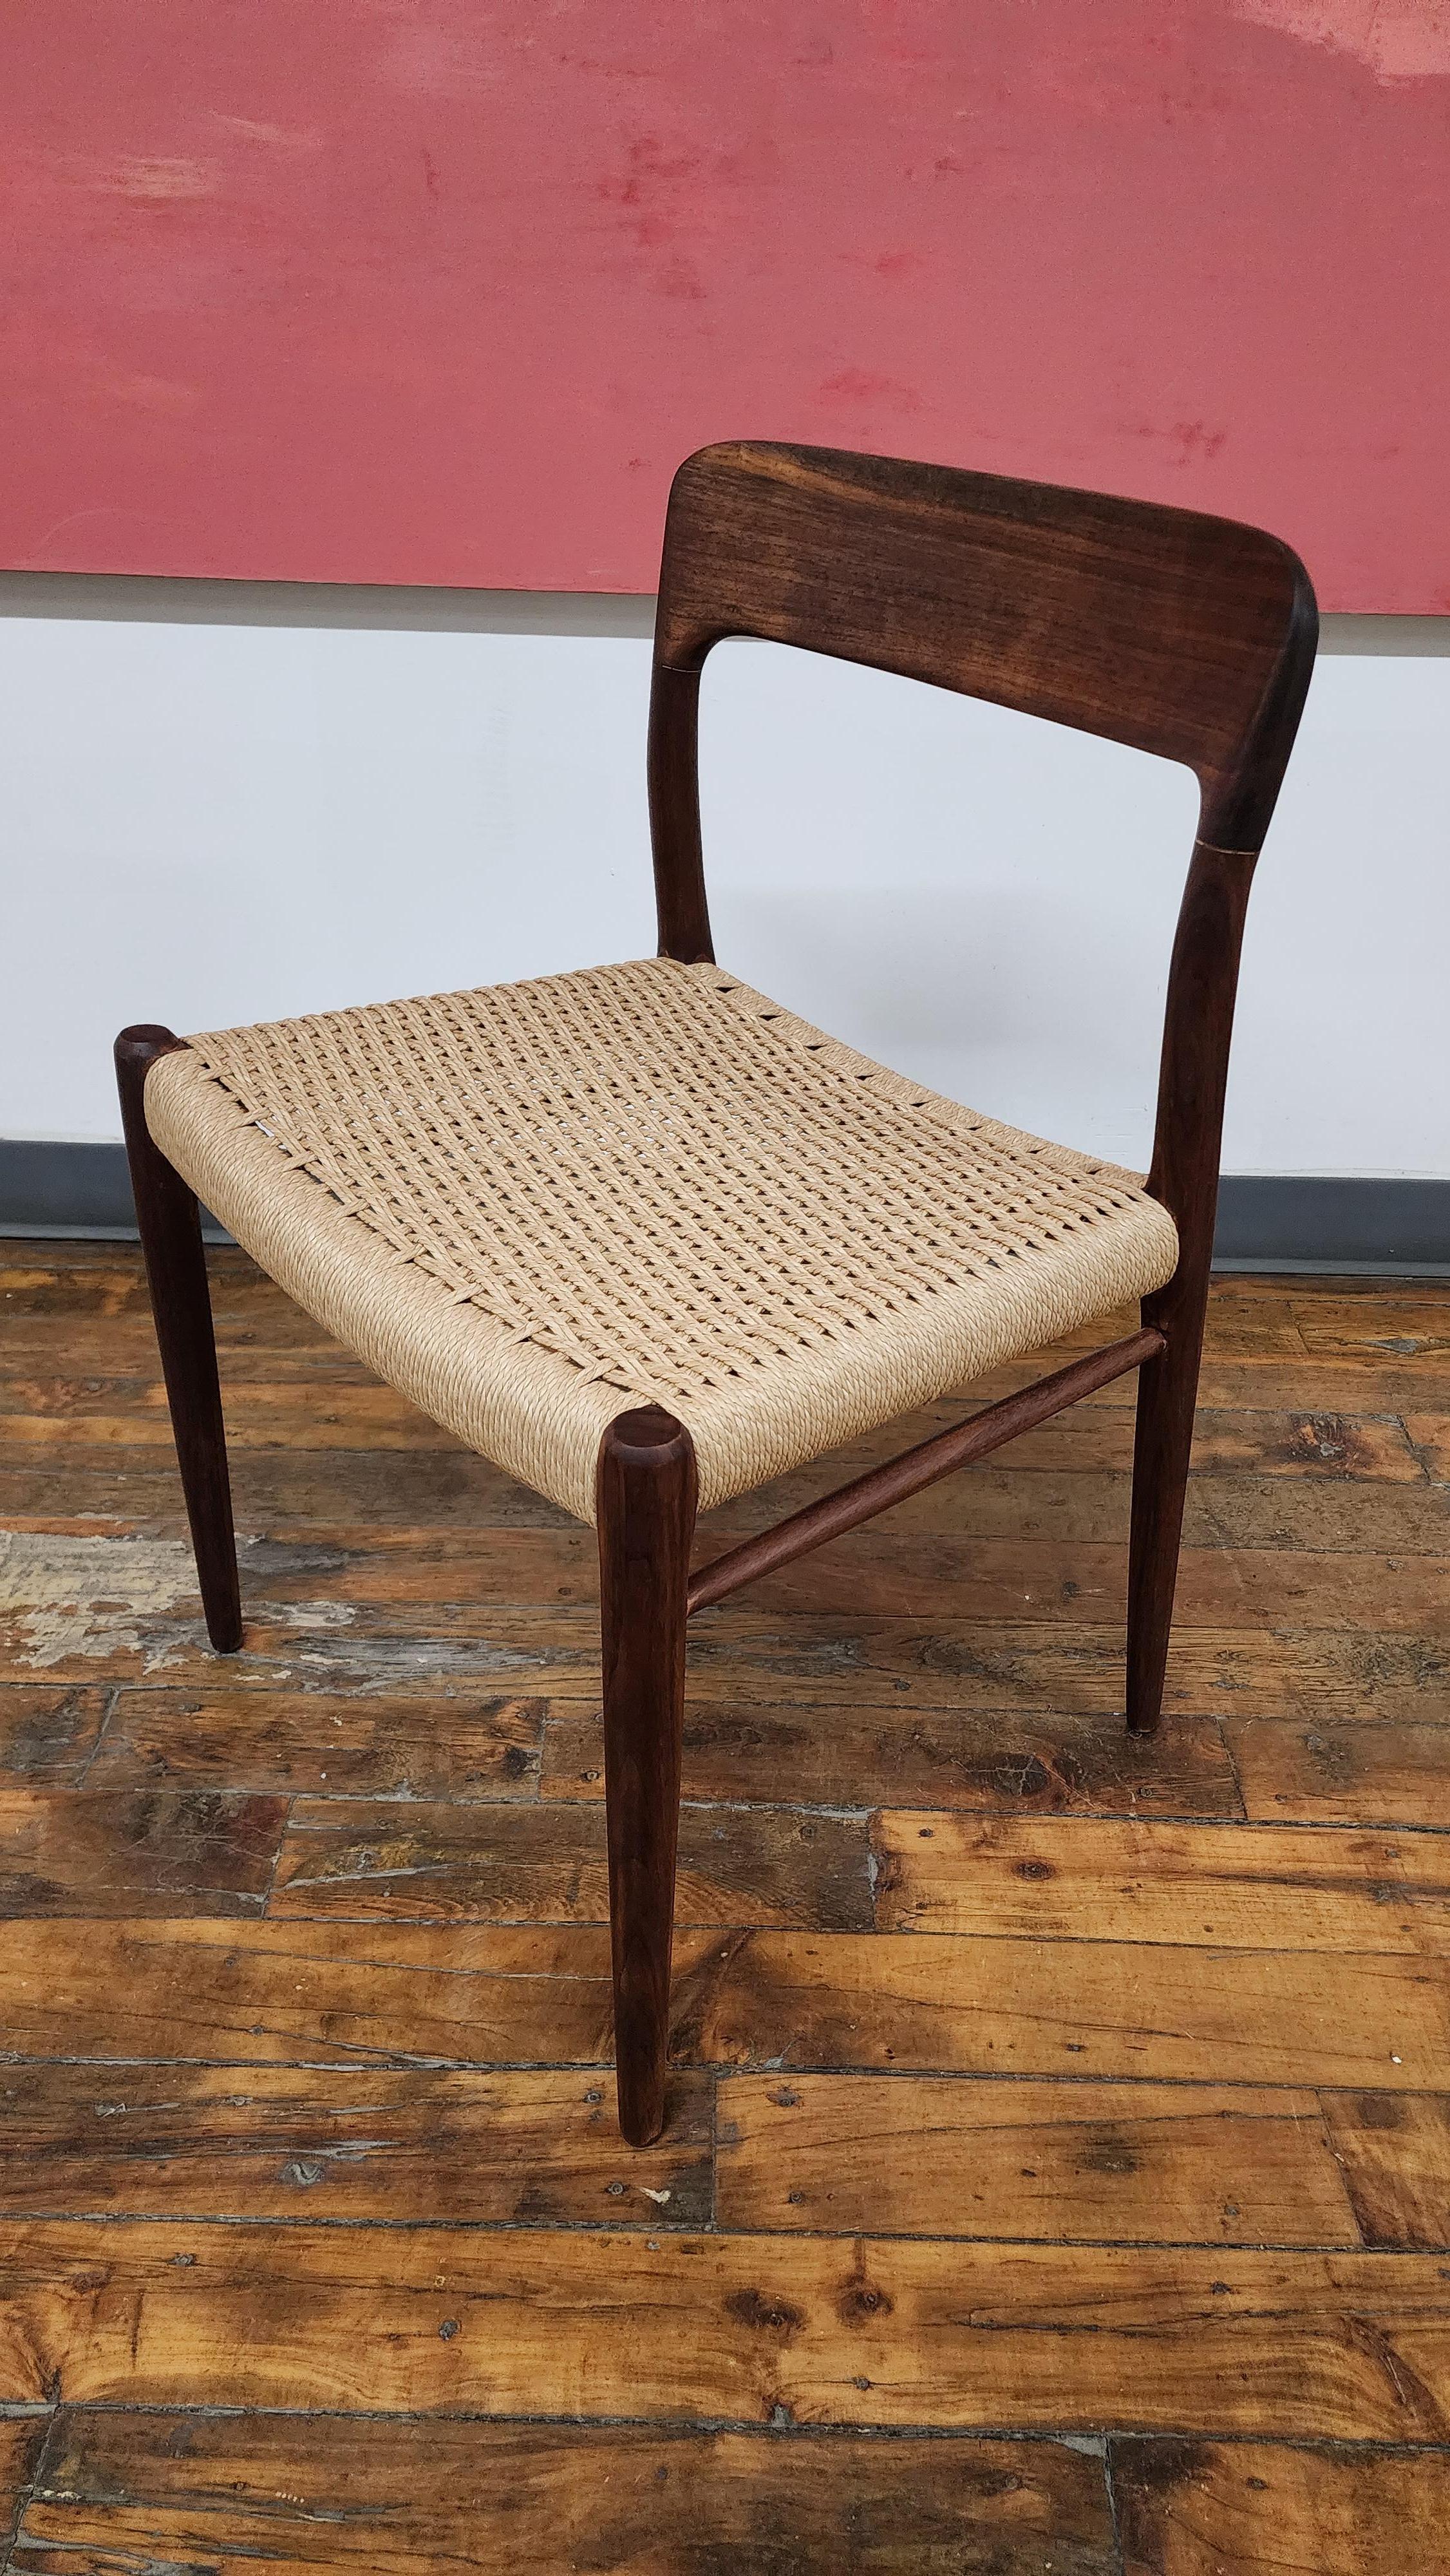 Beautiful refinished danish walnut side chair by Niels Moller for J.L. Moller. this chair has been professionally refinished and has a new danish paperwork seat. this chair would work as single side chair, desk chair or add to a set.